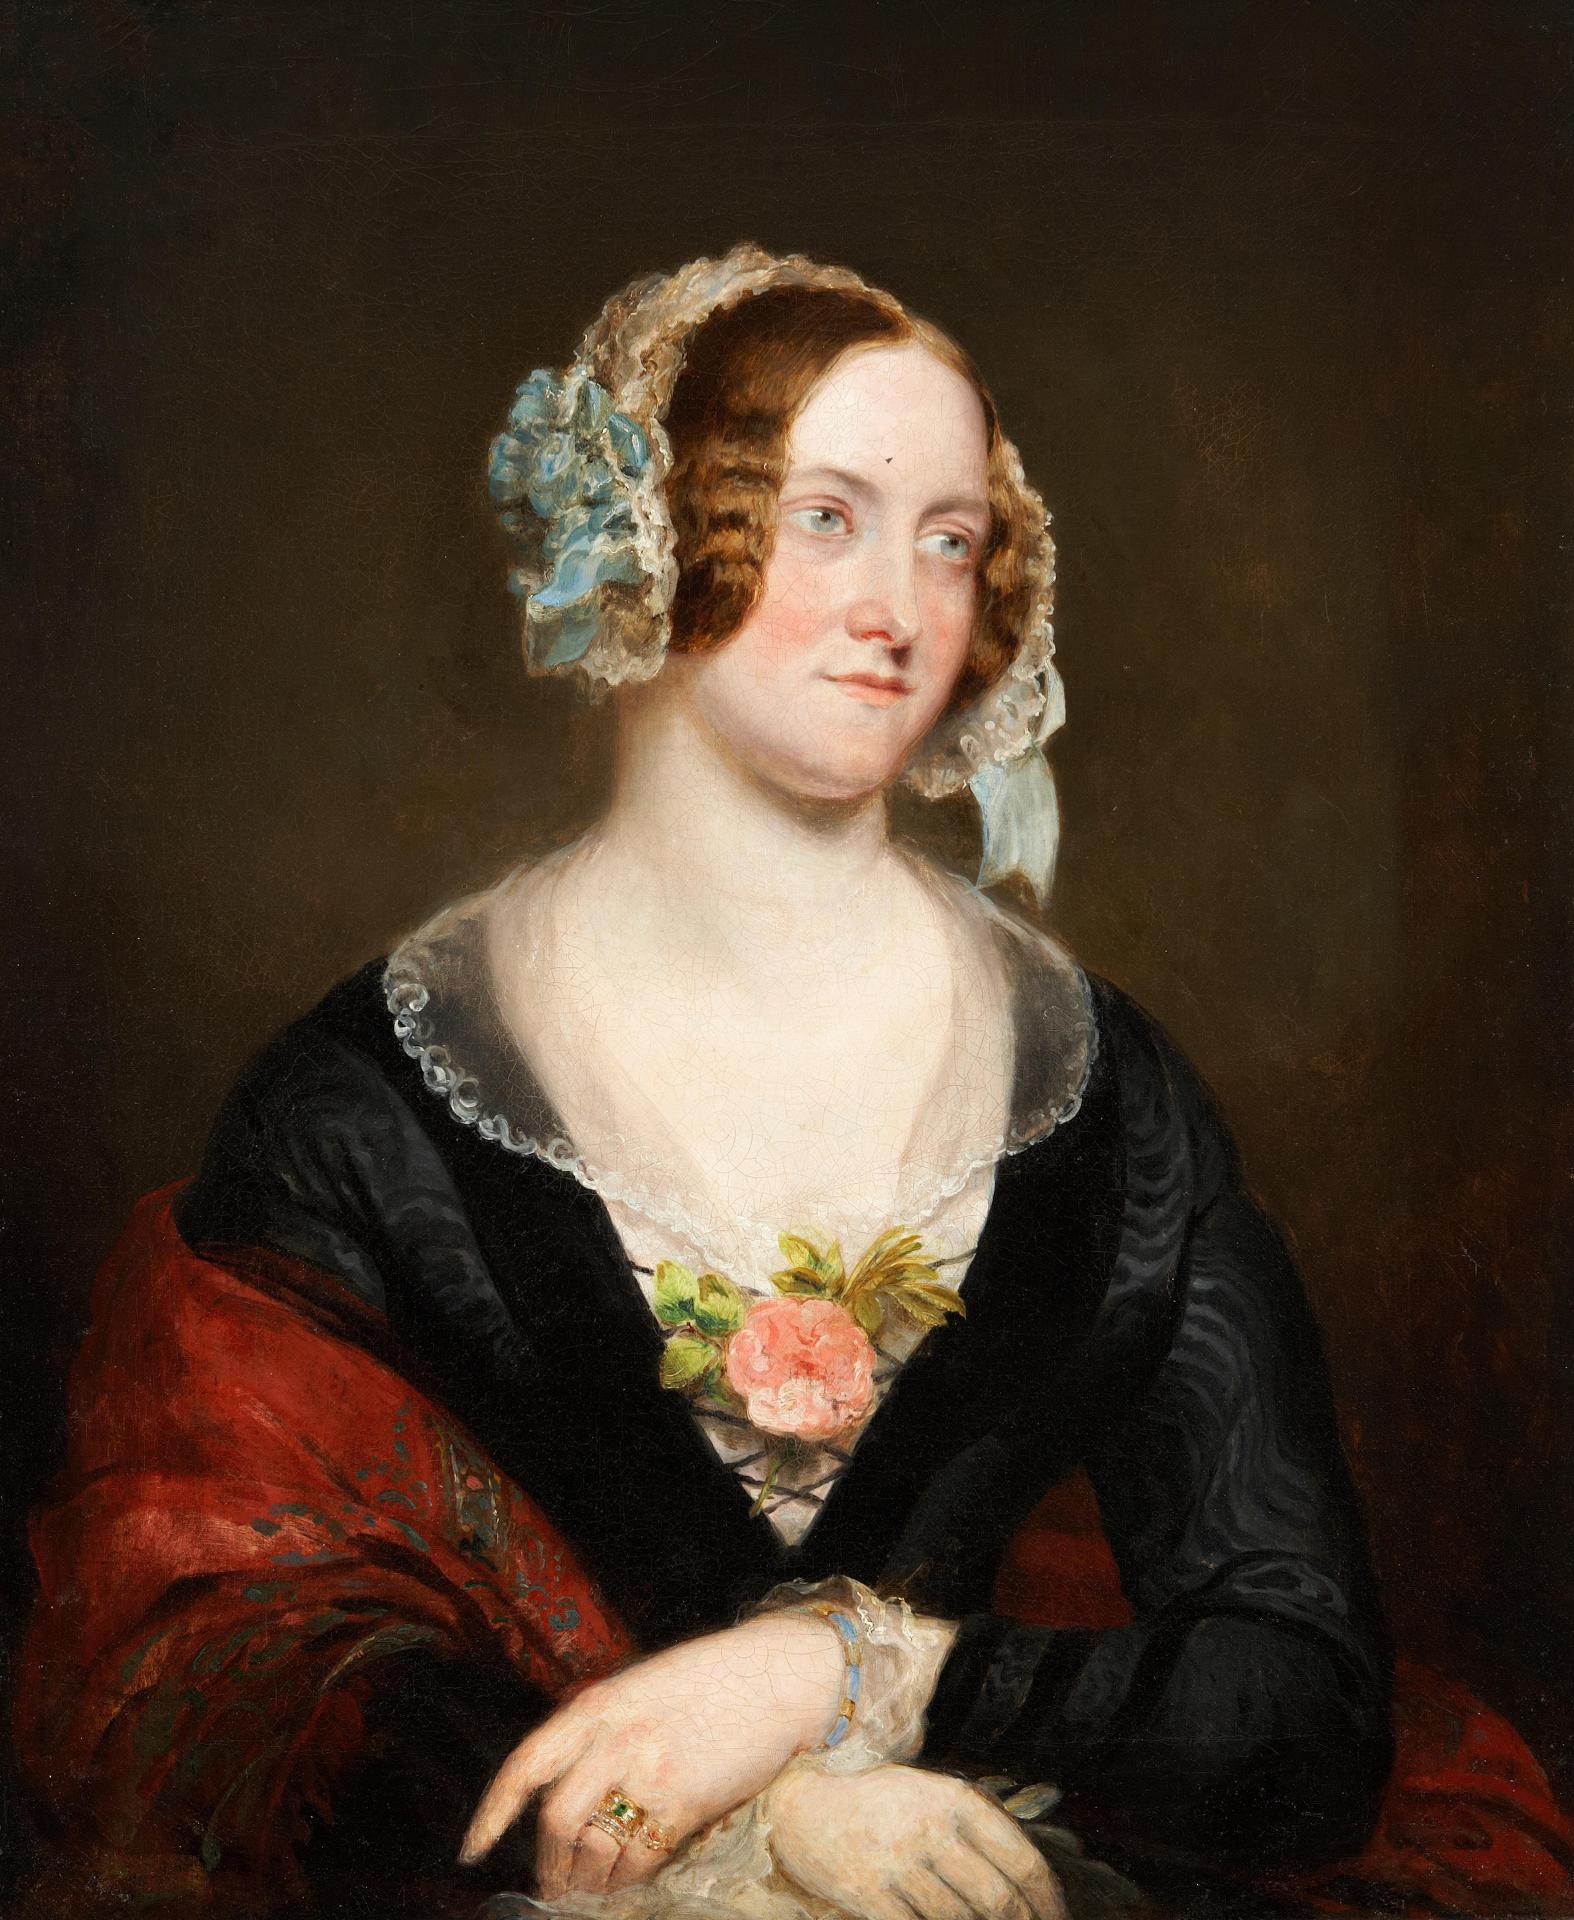 Continental School - Portrait of a lady, said to be Jenny Lind, 'the Swedish Nightingale' half length, in a black dress with a pink rose in her corsage.